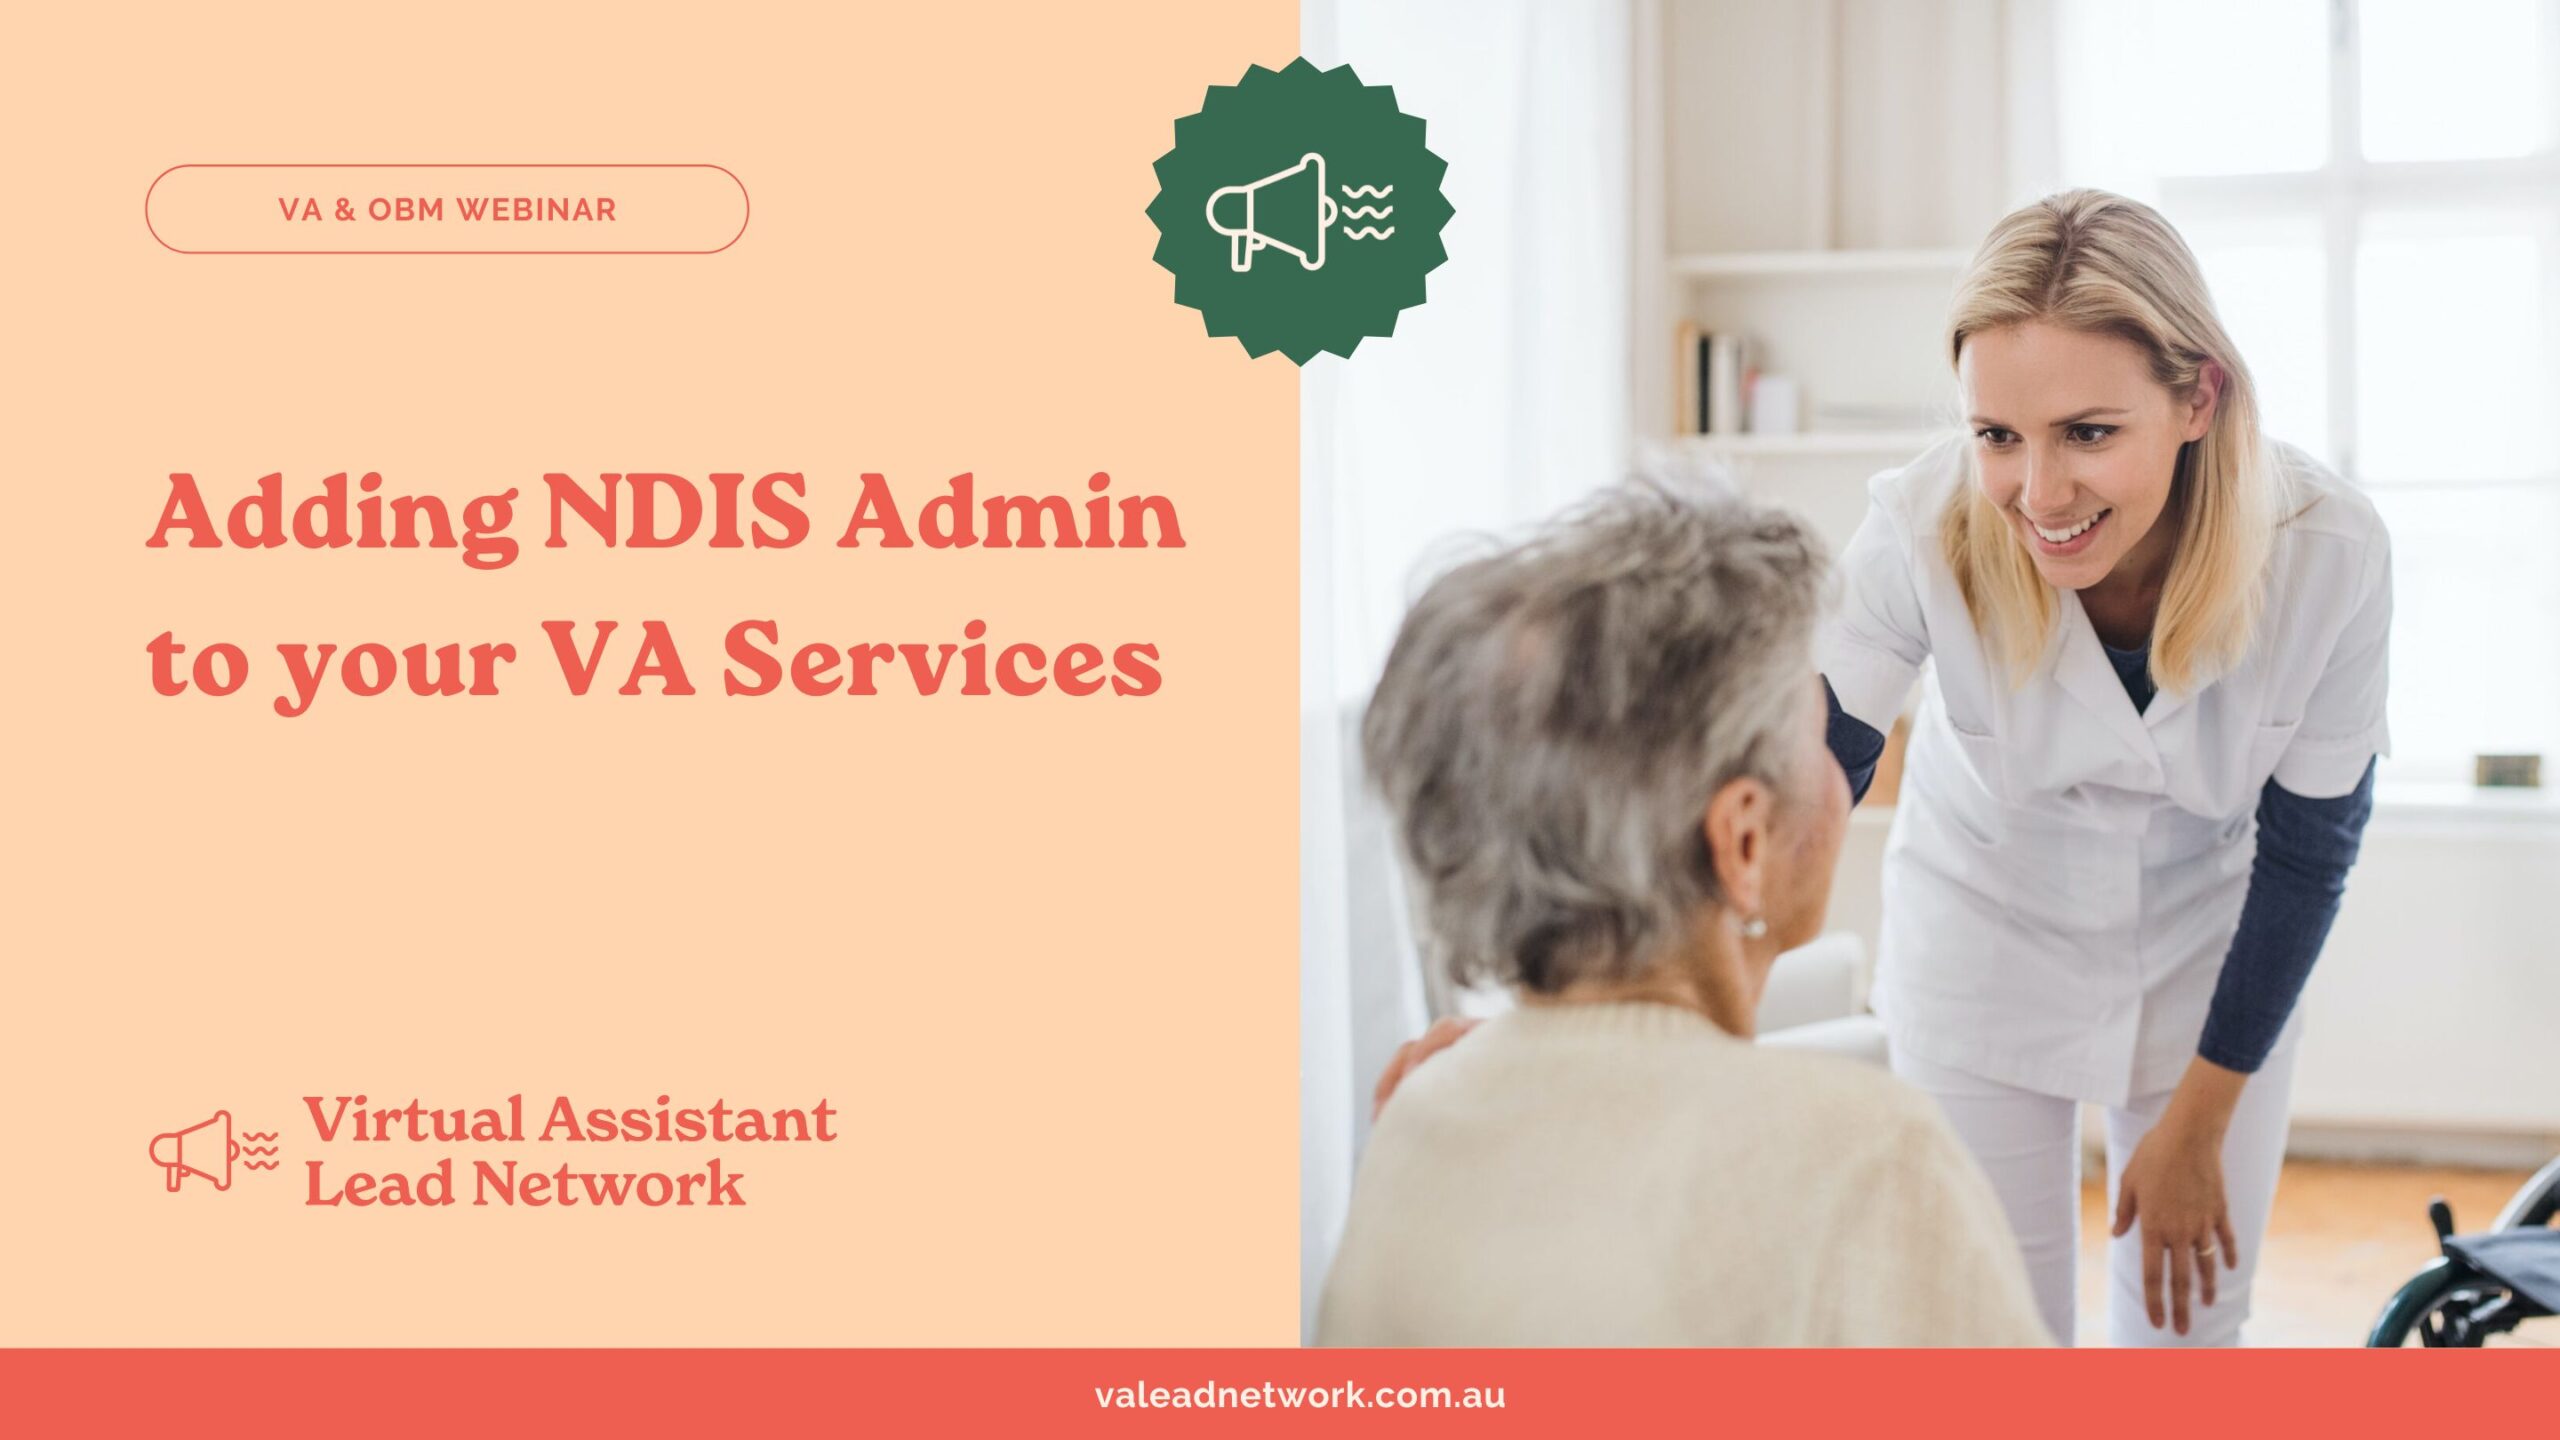 Adding NDIS Admin to your VA Services